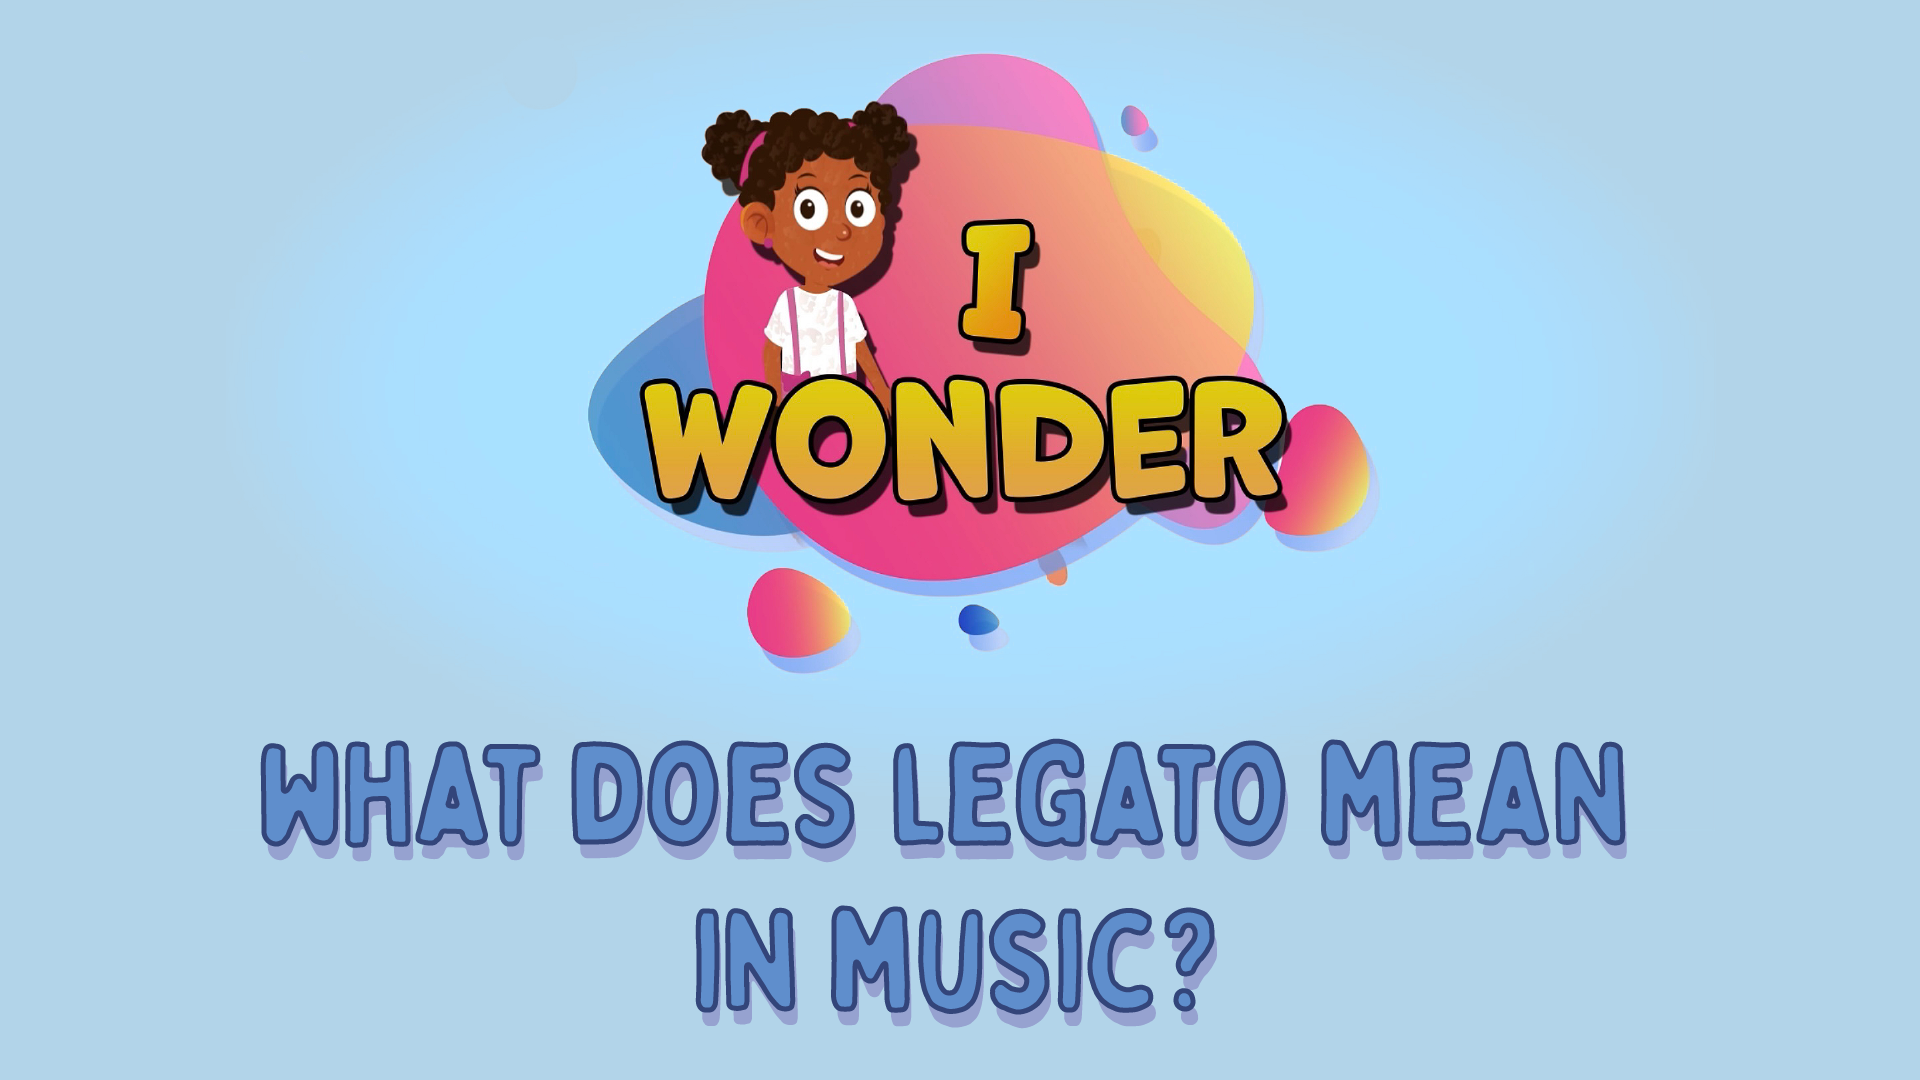 What Does Legato Mean In Music?